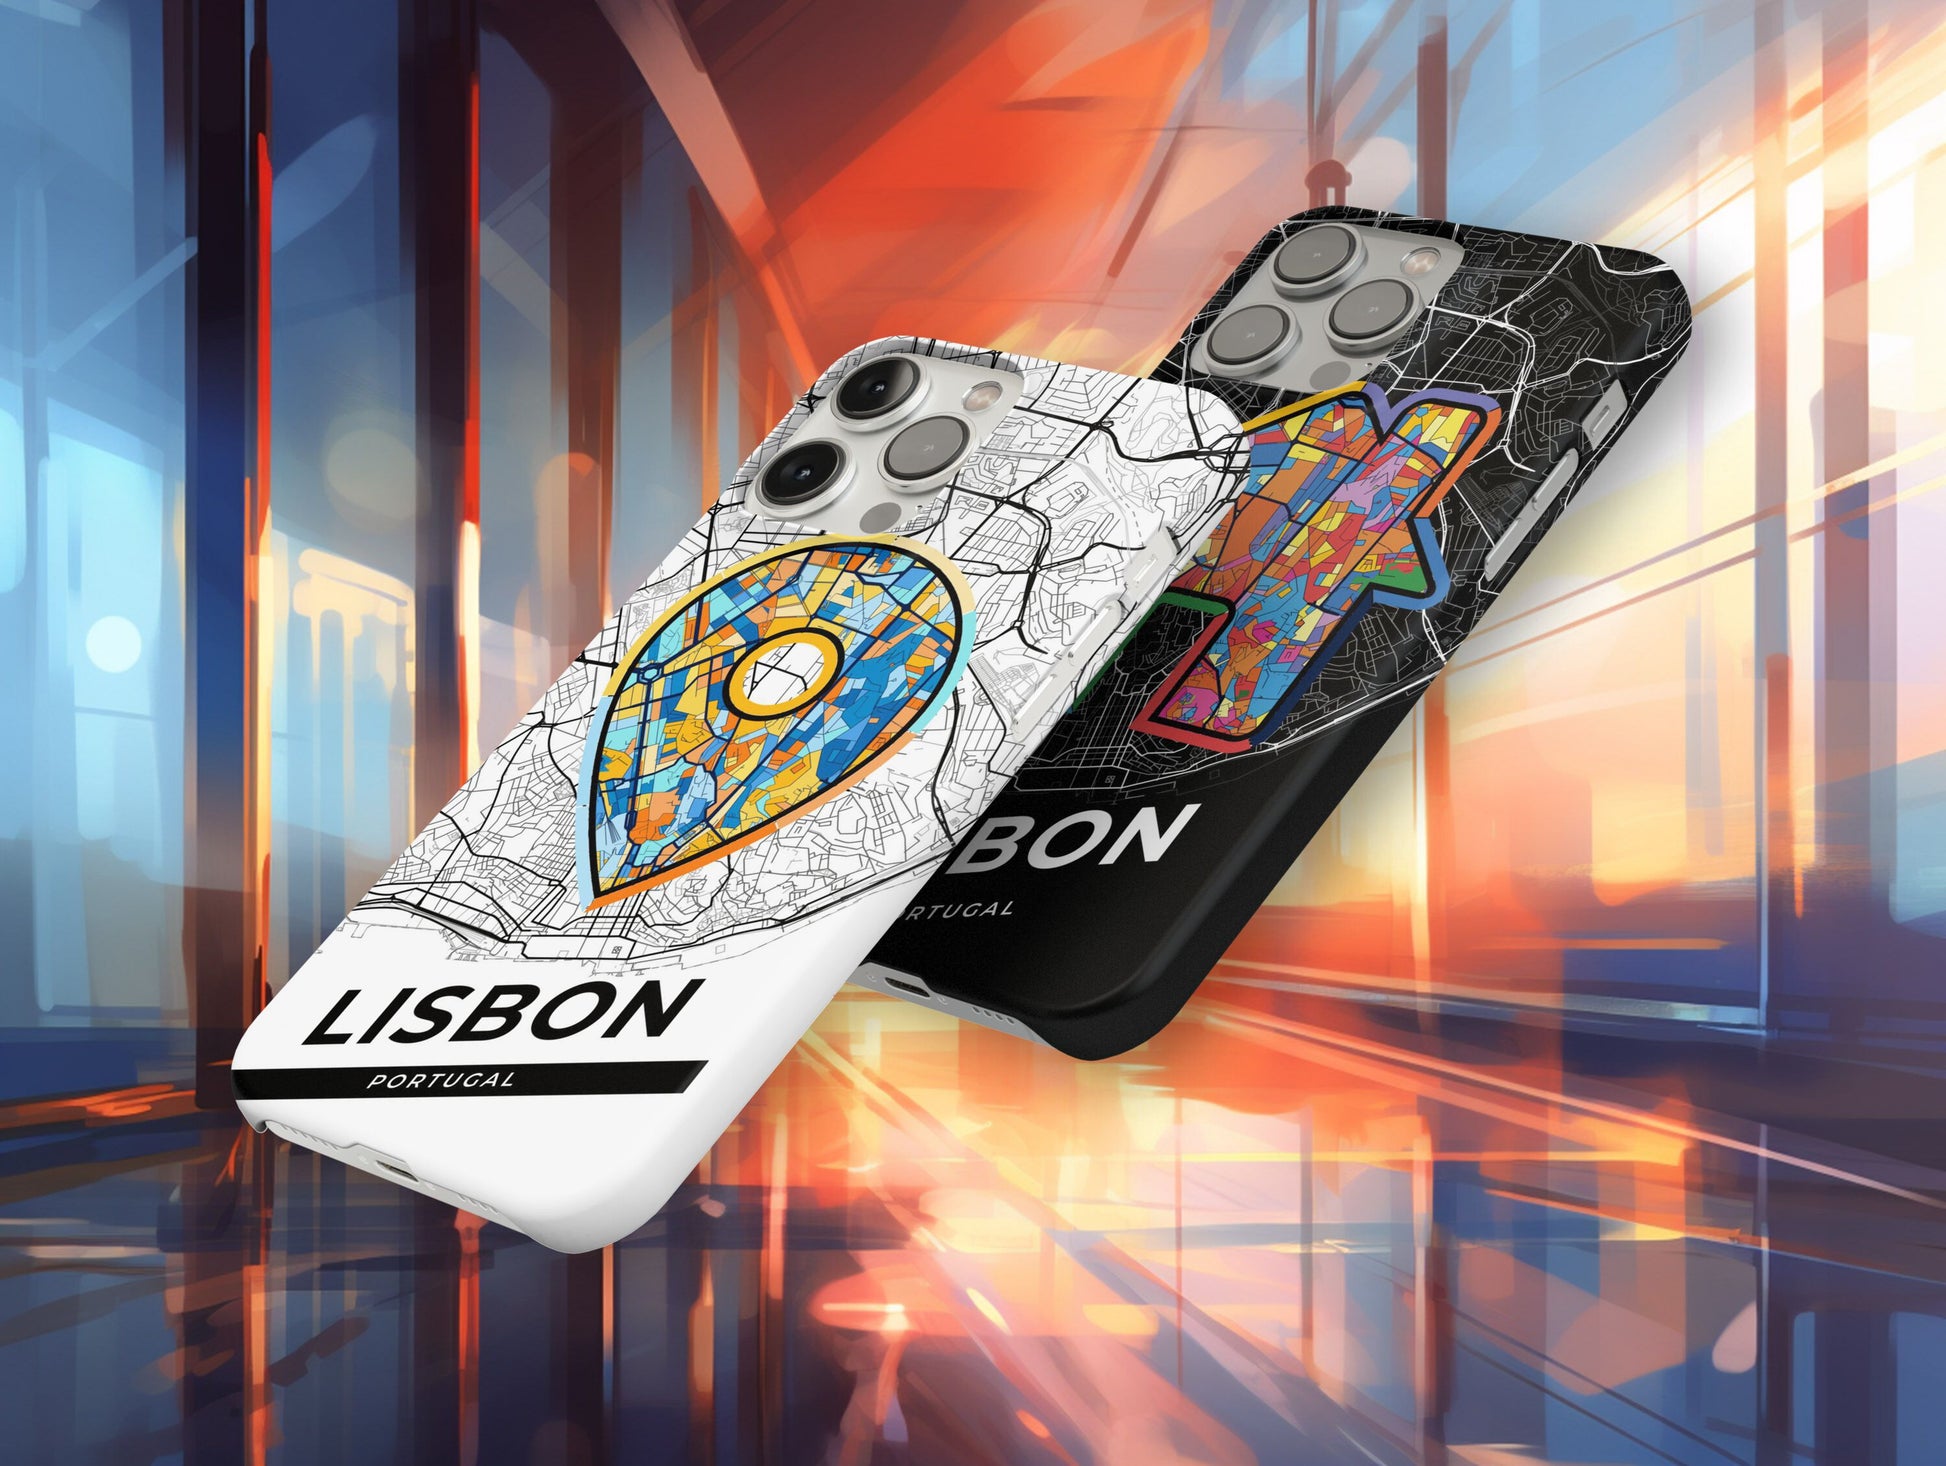 Lisbon Portugal slim phone case with colorful icon. Birthday, wedding or housewarming gift. Couple match cases.